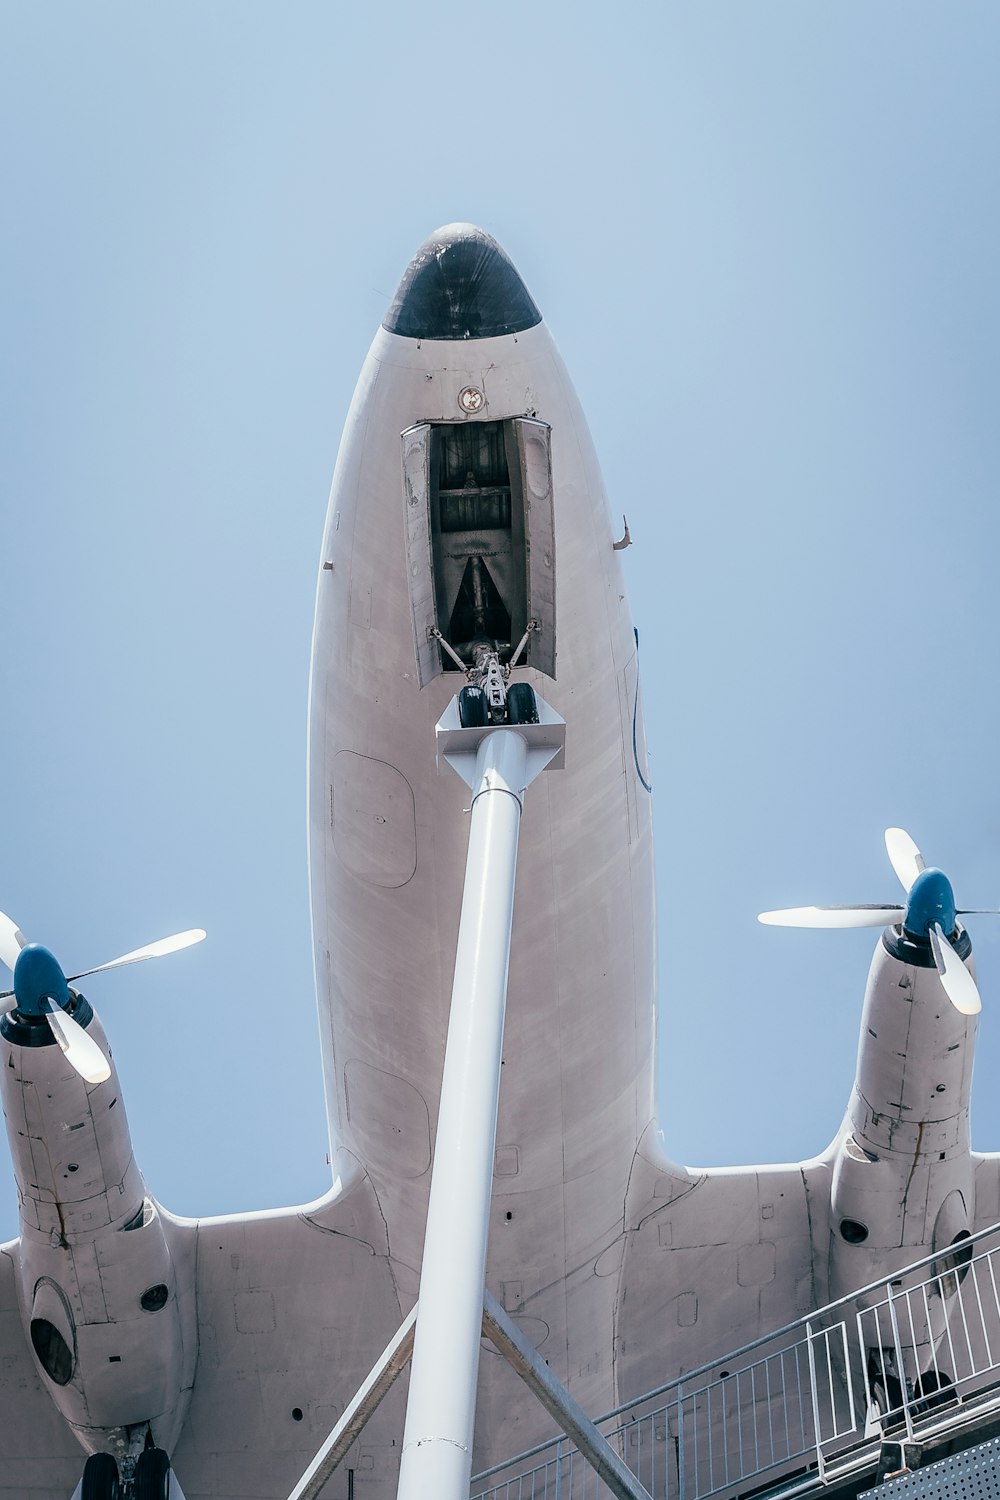 white and black airplane under blue sky during daytime